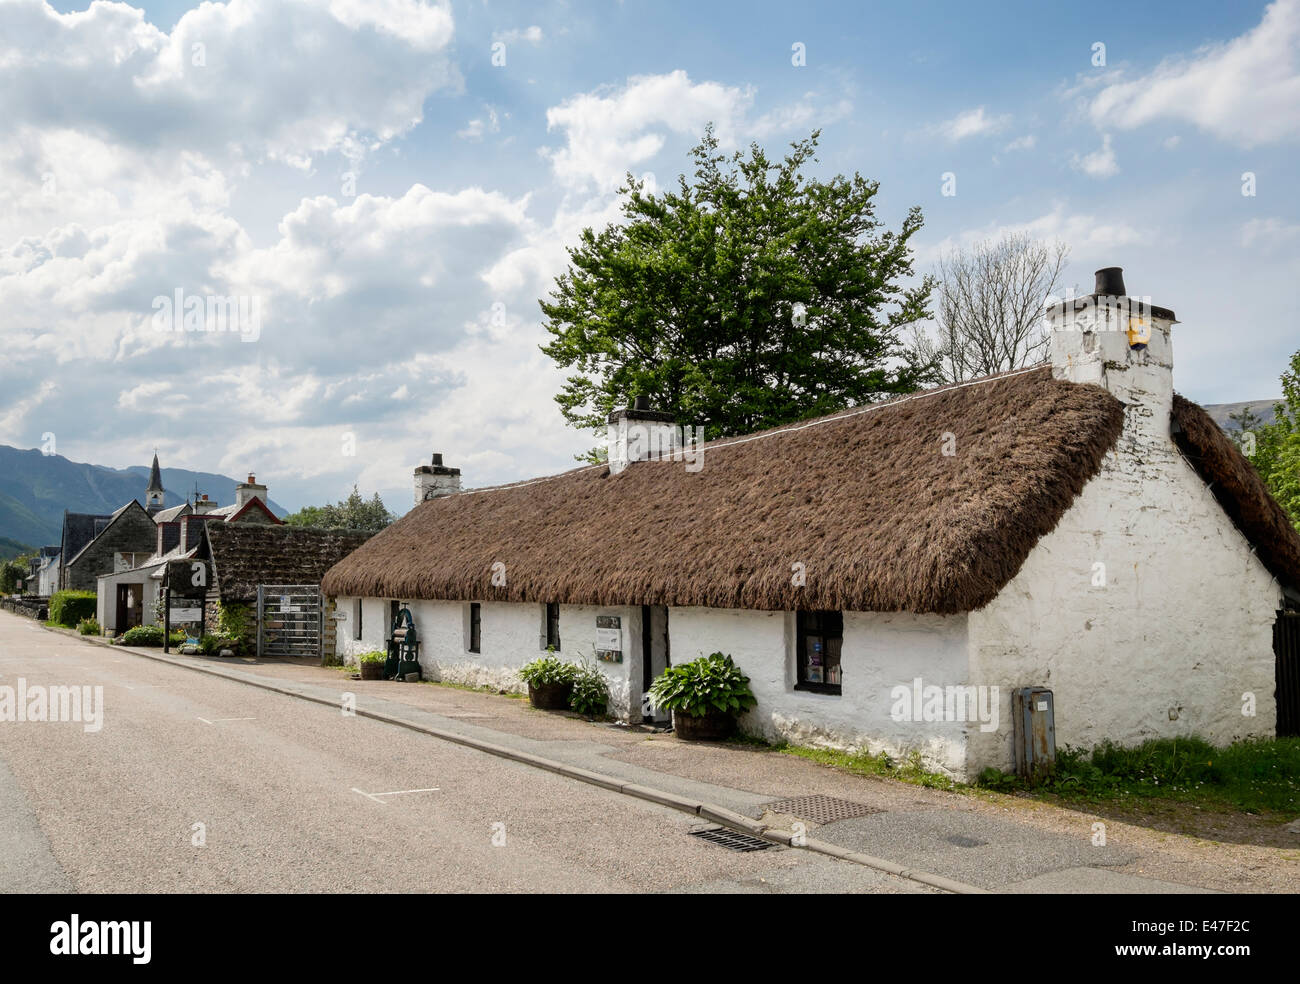 Glencoe and North Lorn Folk Museum in old thatched building in village of Glencoe, Highland, Scotland, UK, Britain, Europe. Stock Photo